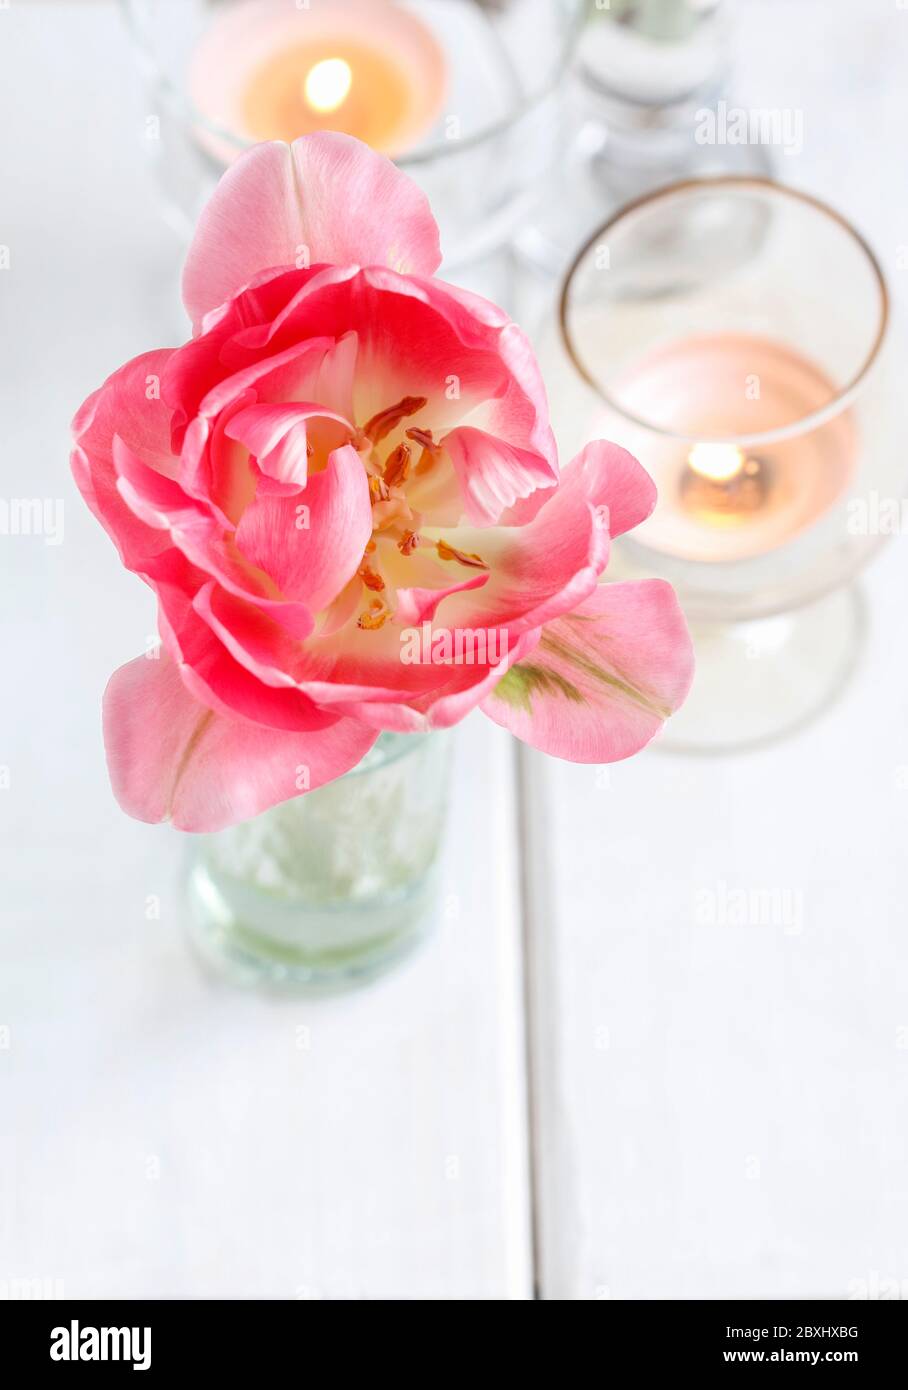 Simple, minimalistic table decoration with single pink tulip. Home decor Stock Photo